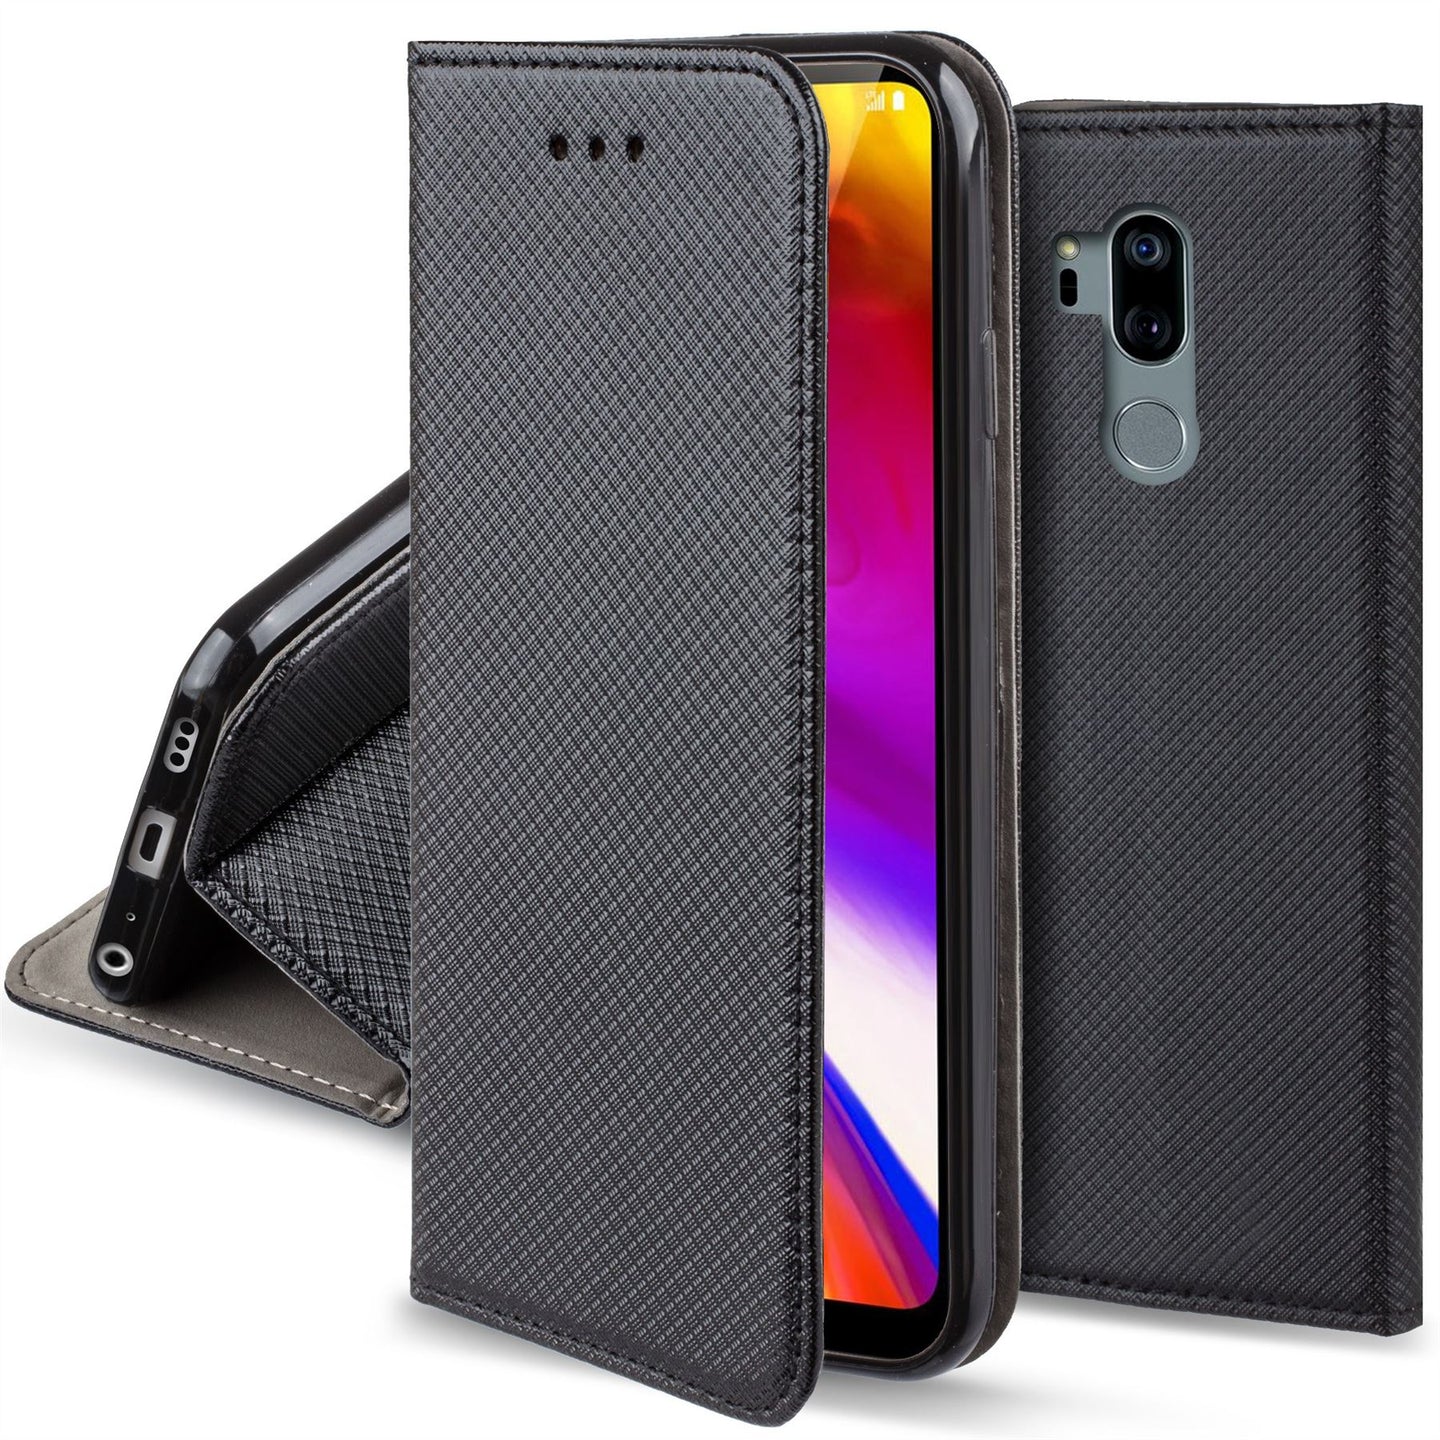 Moozy Case Flip Cover for LG G7 ThinQ, LG G7 Plus, Black - Smart Magnetic Flip Case with Card Holder and Stand